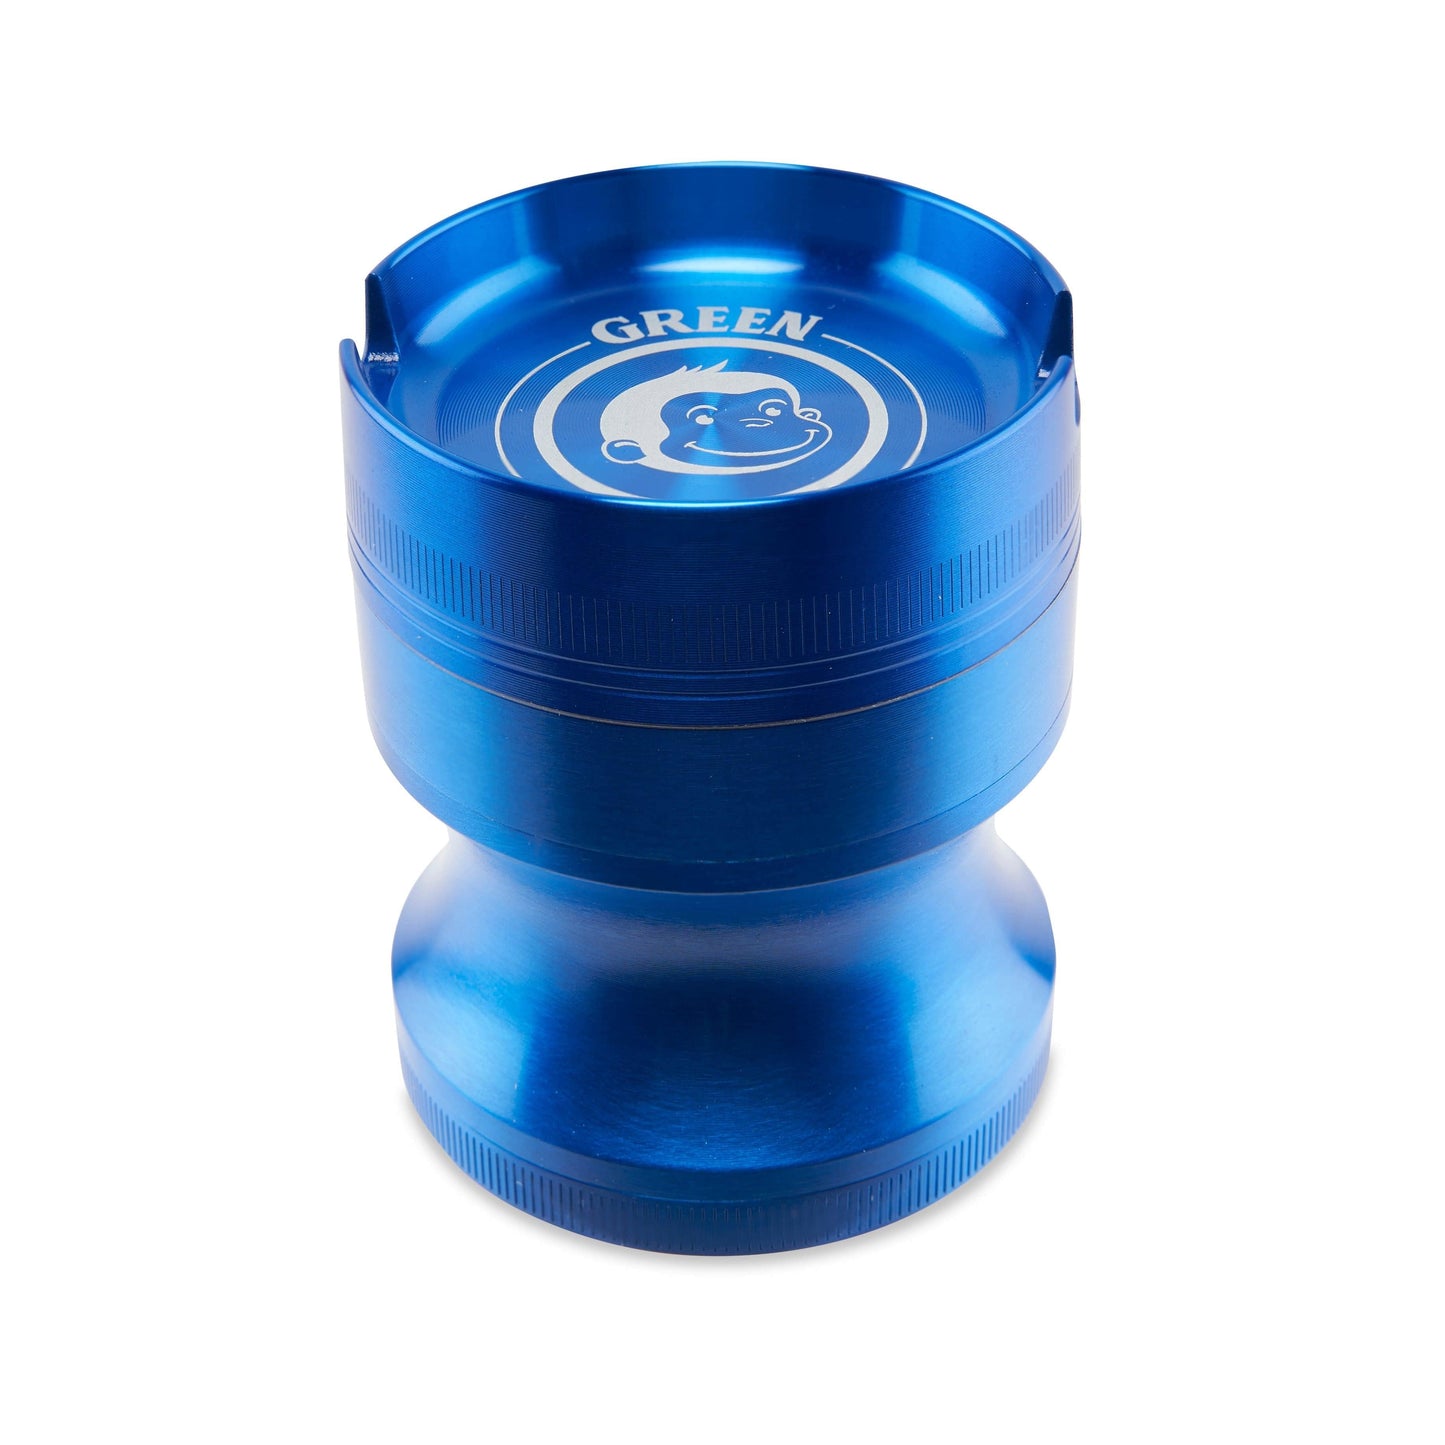 Green Monkey Grinders Blue Chacma 63mm Magnetic Grinder with Ashtray